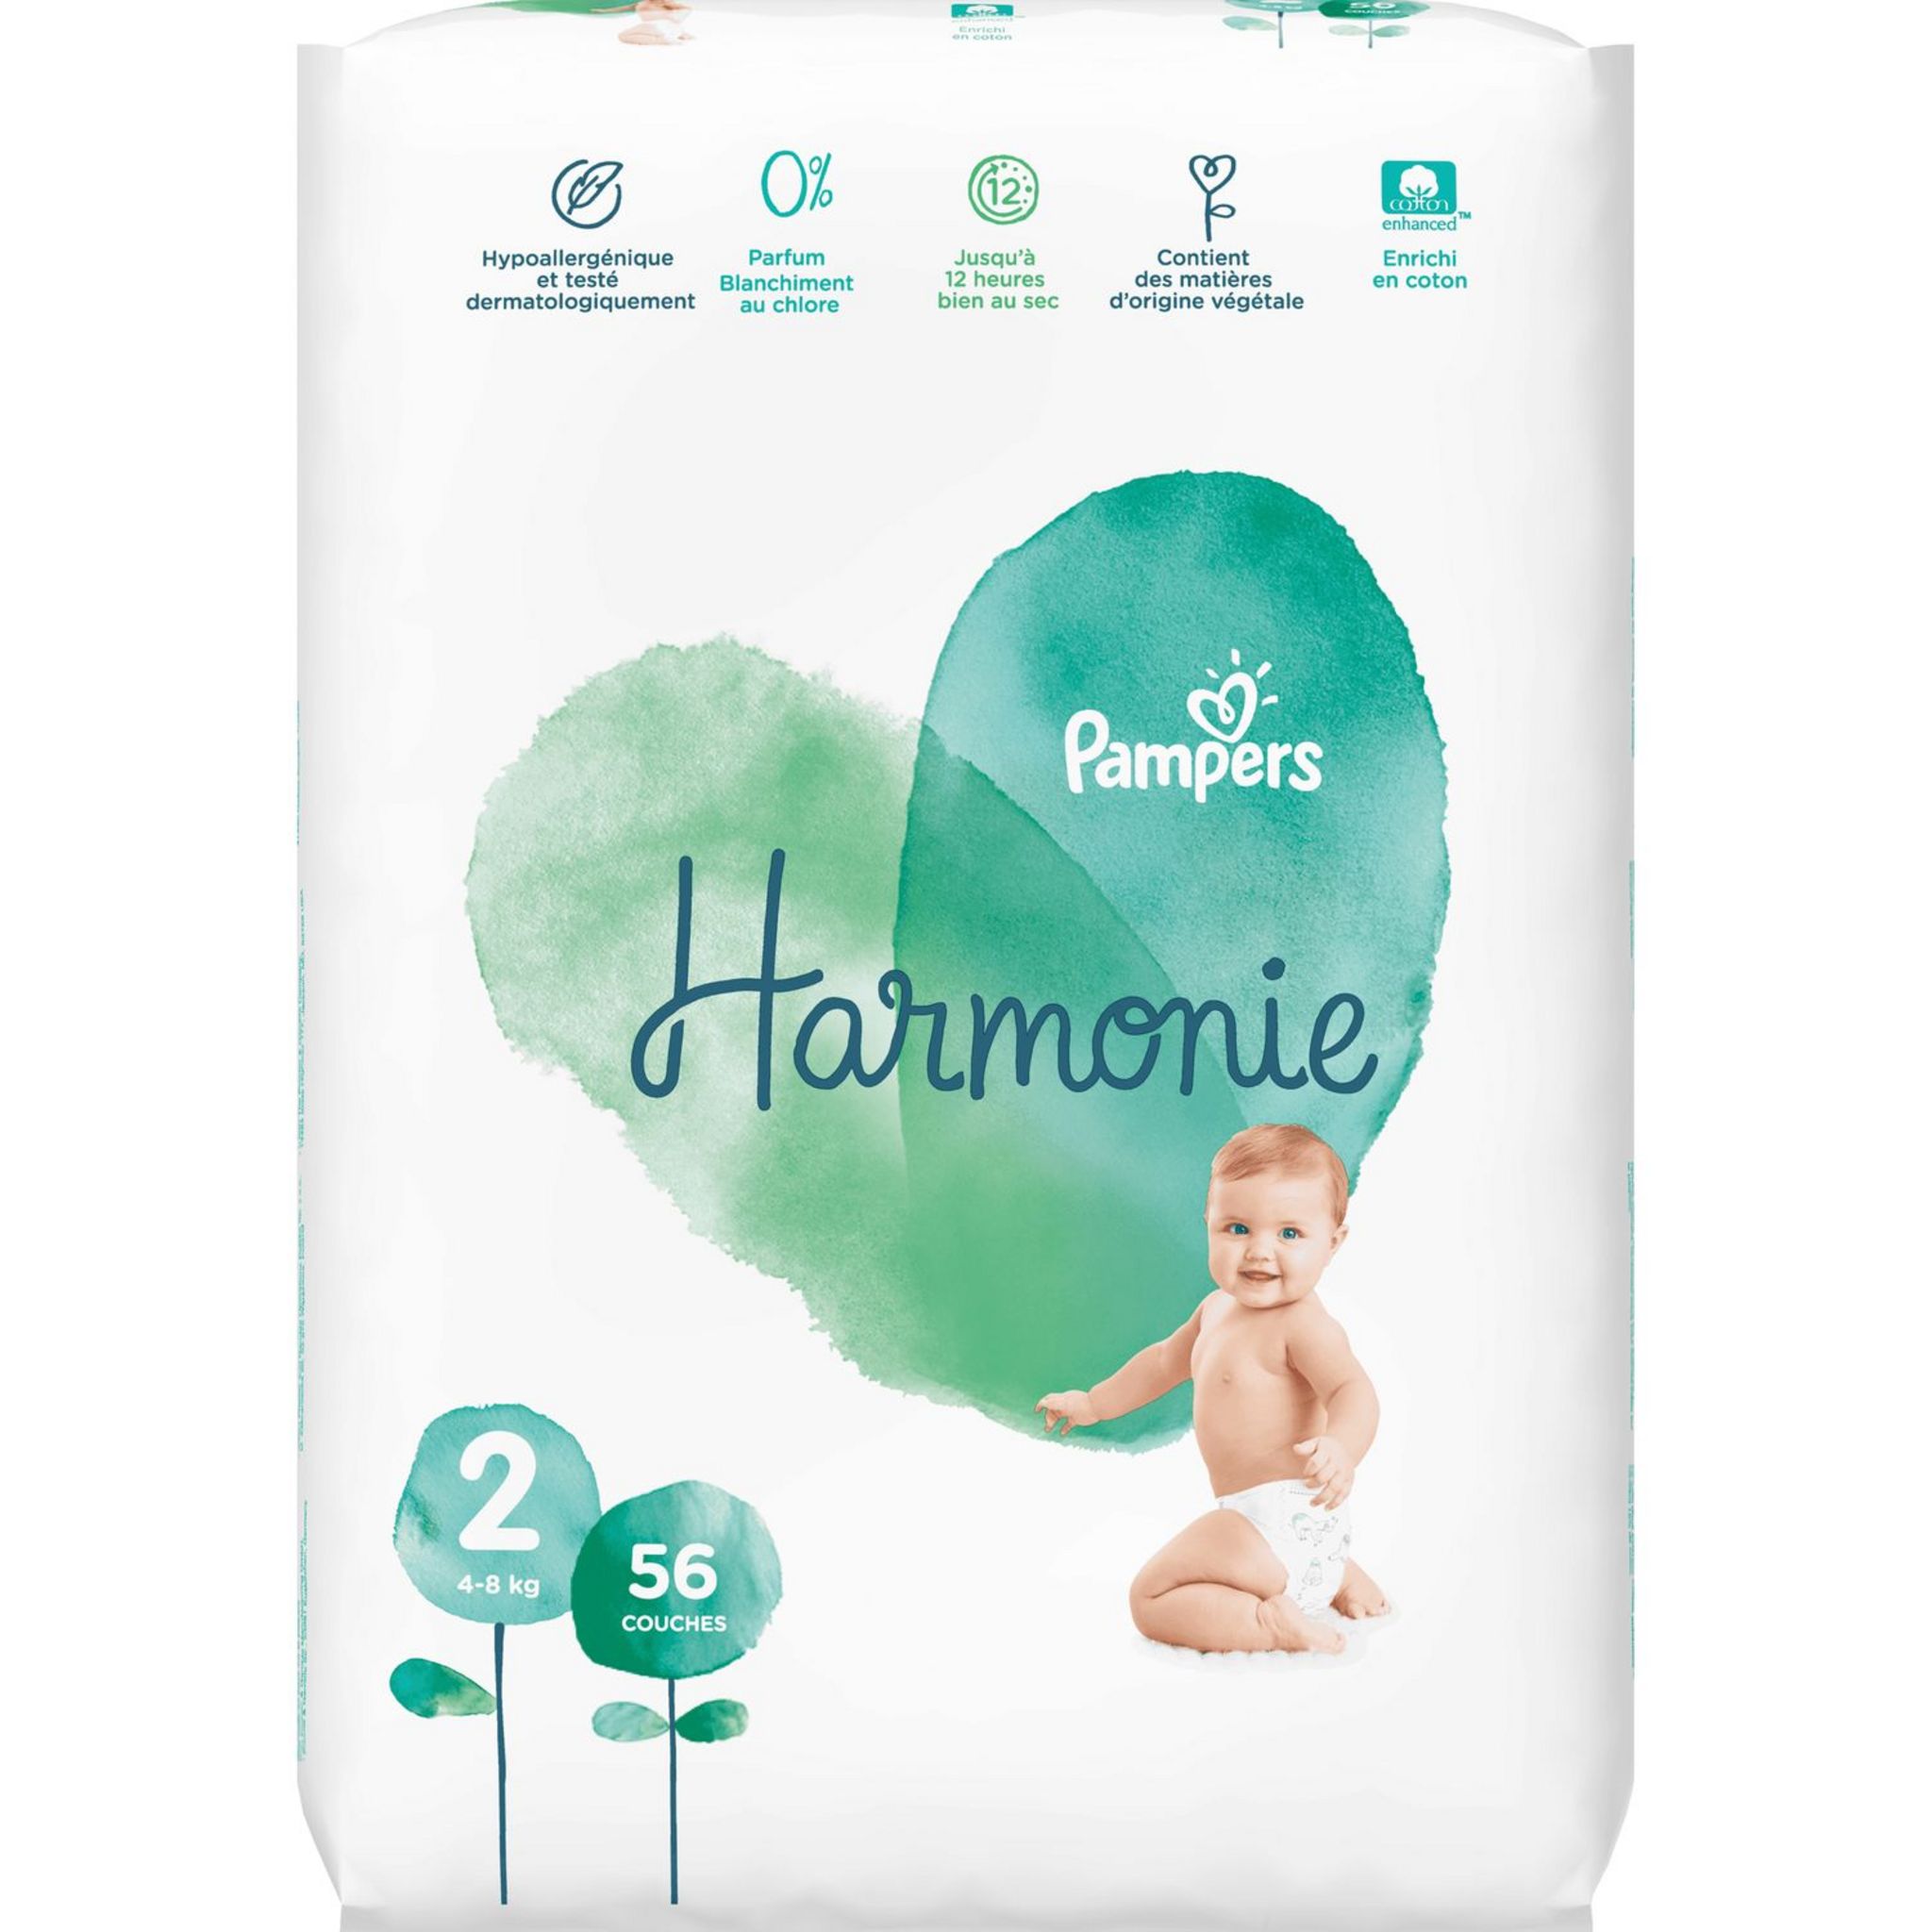 PAMPERS Harmonie couches taille 2 (4-8kg) 56 couches pas cher